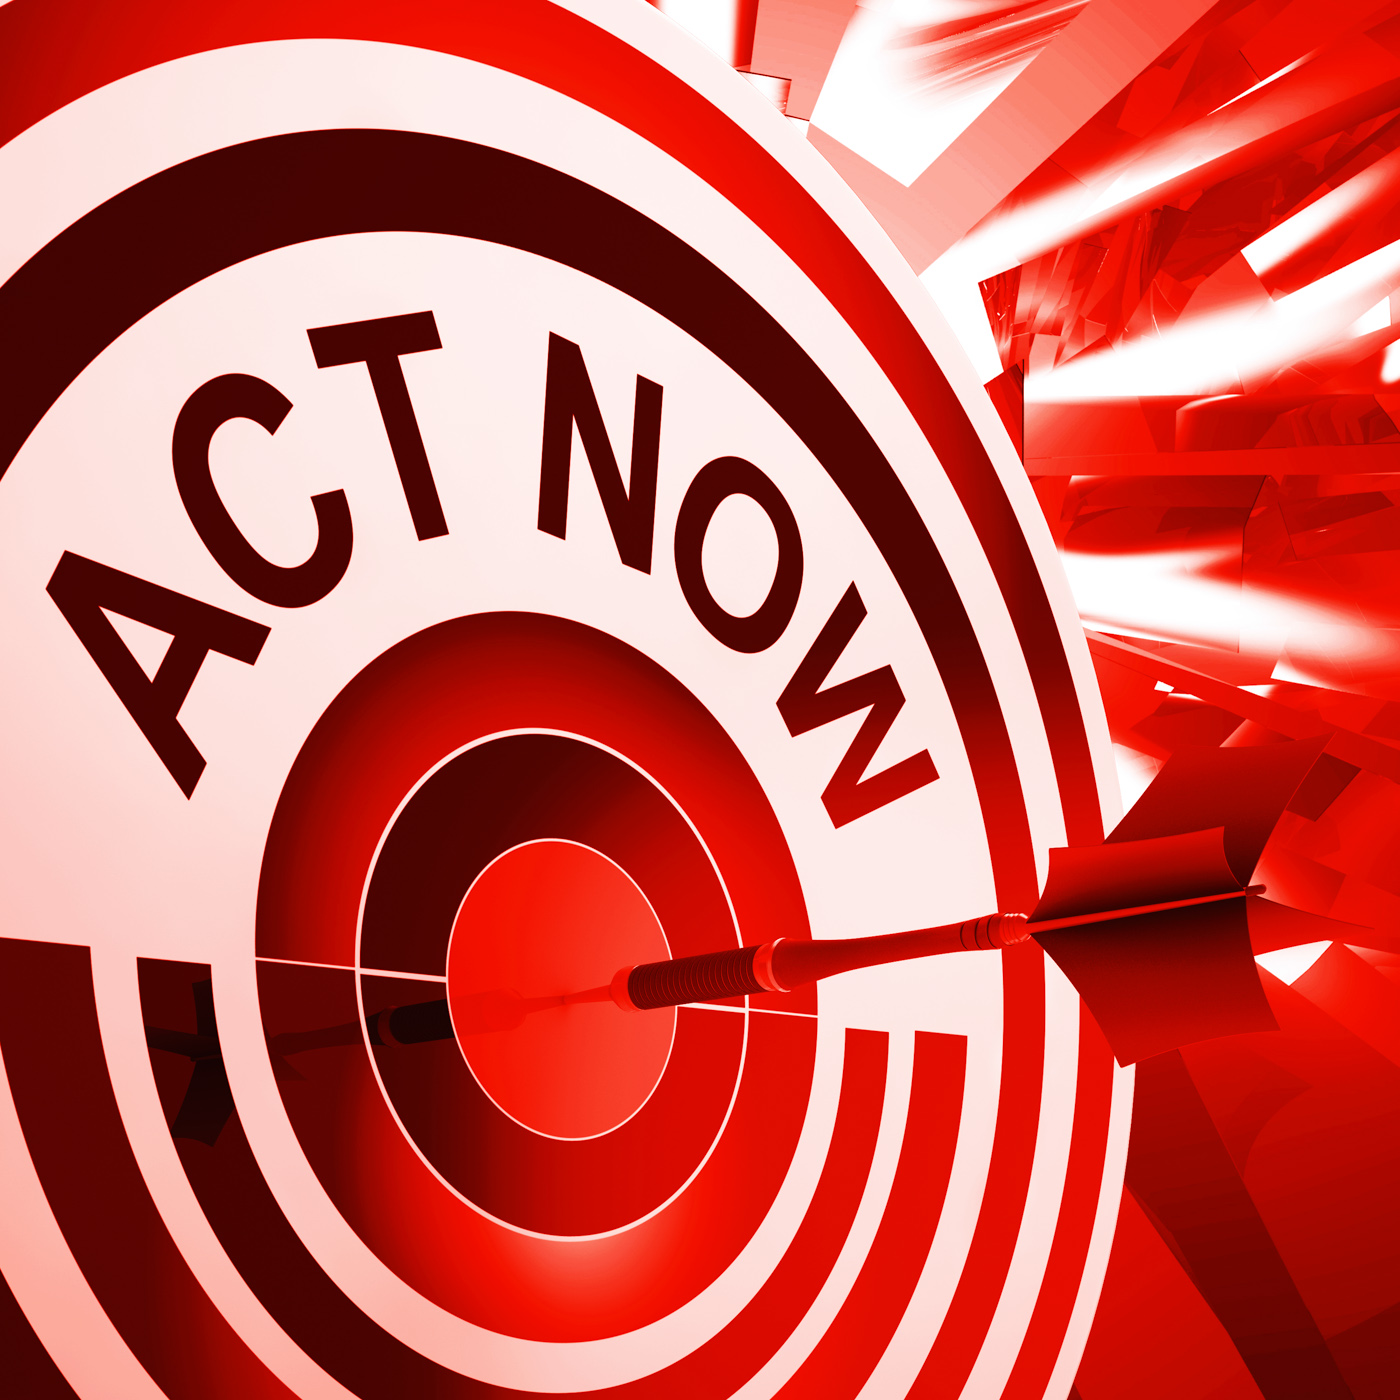 Act Now Means To Take Quick Action, Act, Motivate, Urgency, Take, HQ Photo